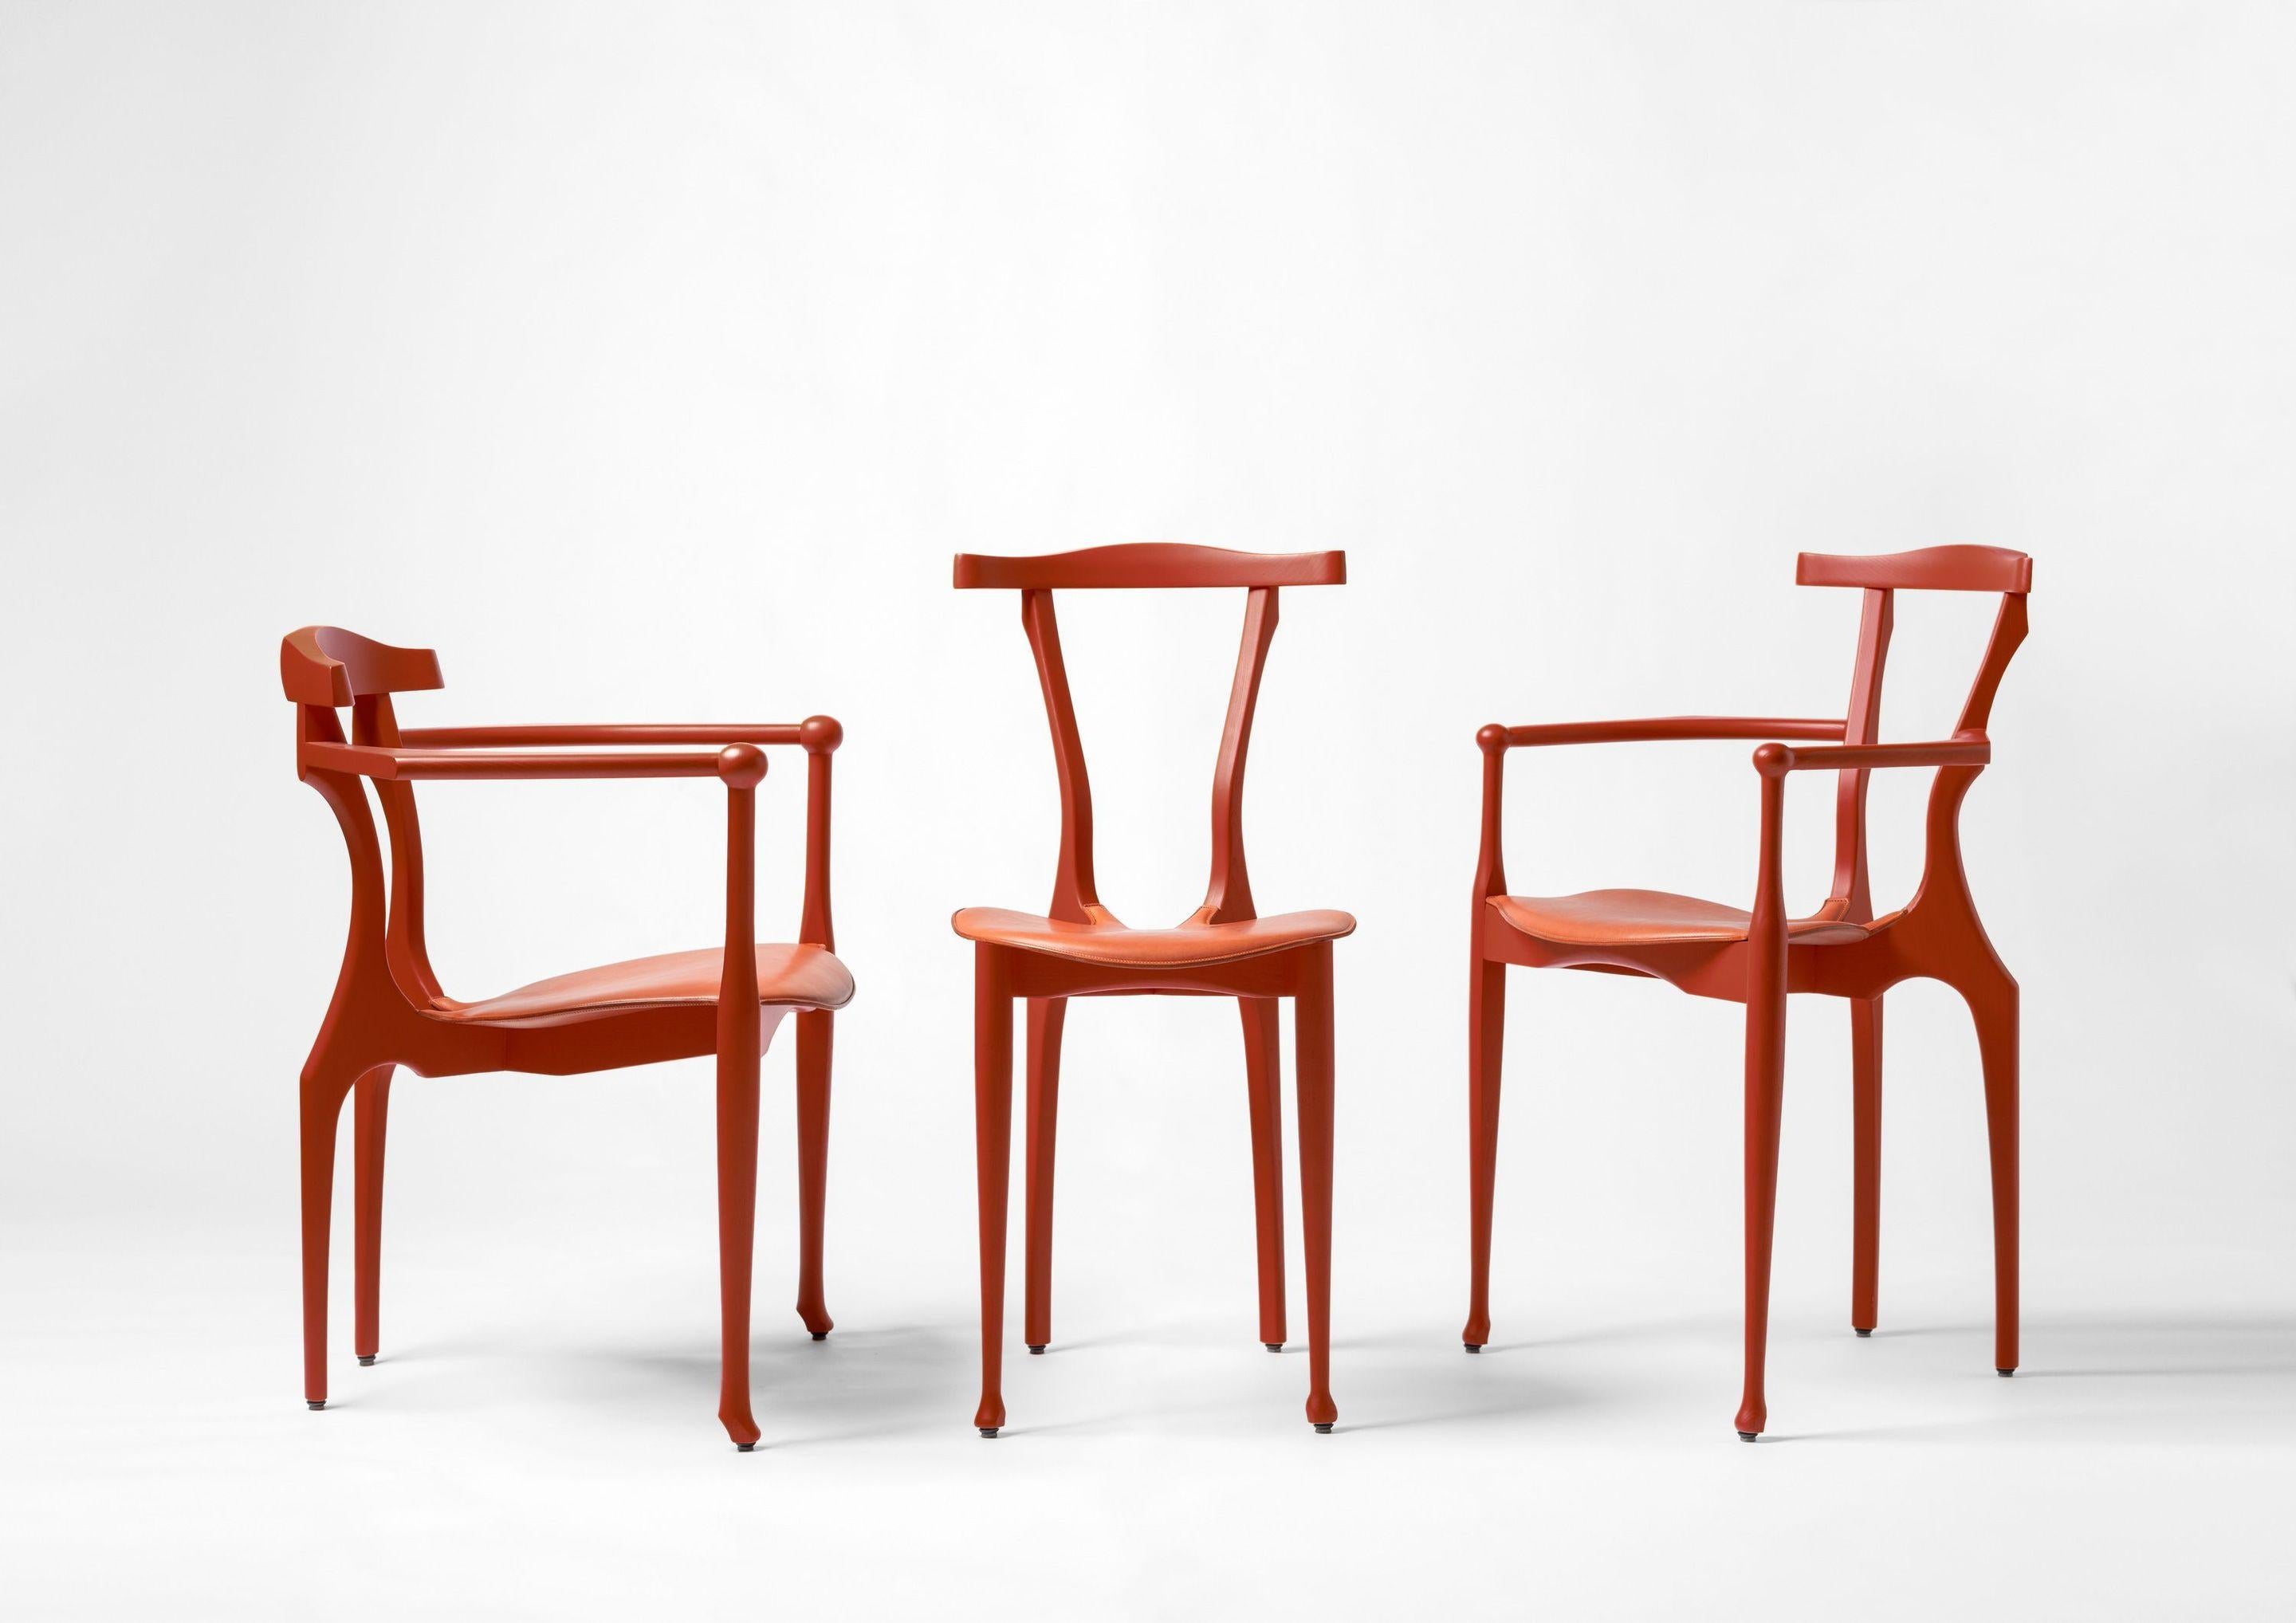 The Gaulinetta is an evolution of the Gaulino chair. In words of Oscar Tusquets In homage to Enzo Mari, who called his chair Tonietta, a derivative of Thonet, I’ve called this chair Gaulinetta, after the Gaulino.

The Gaulino chair was designed in